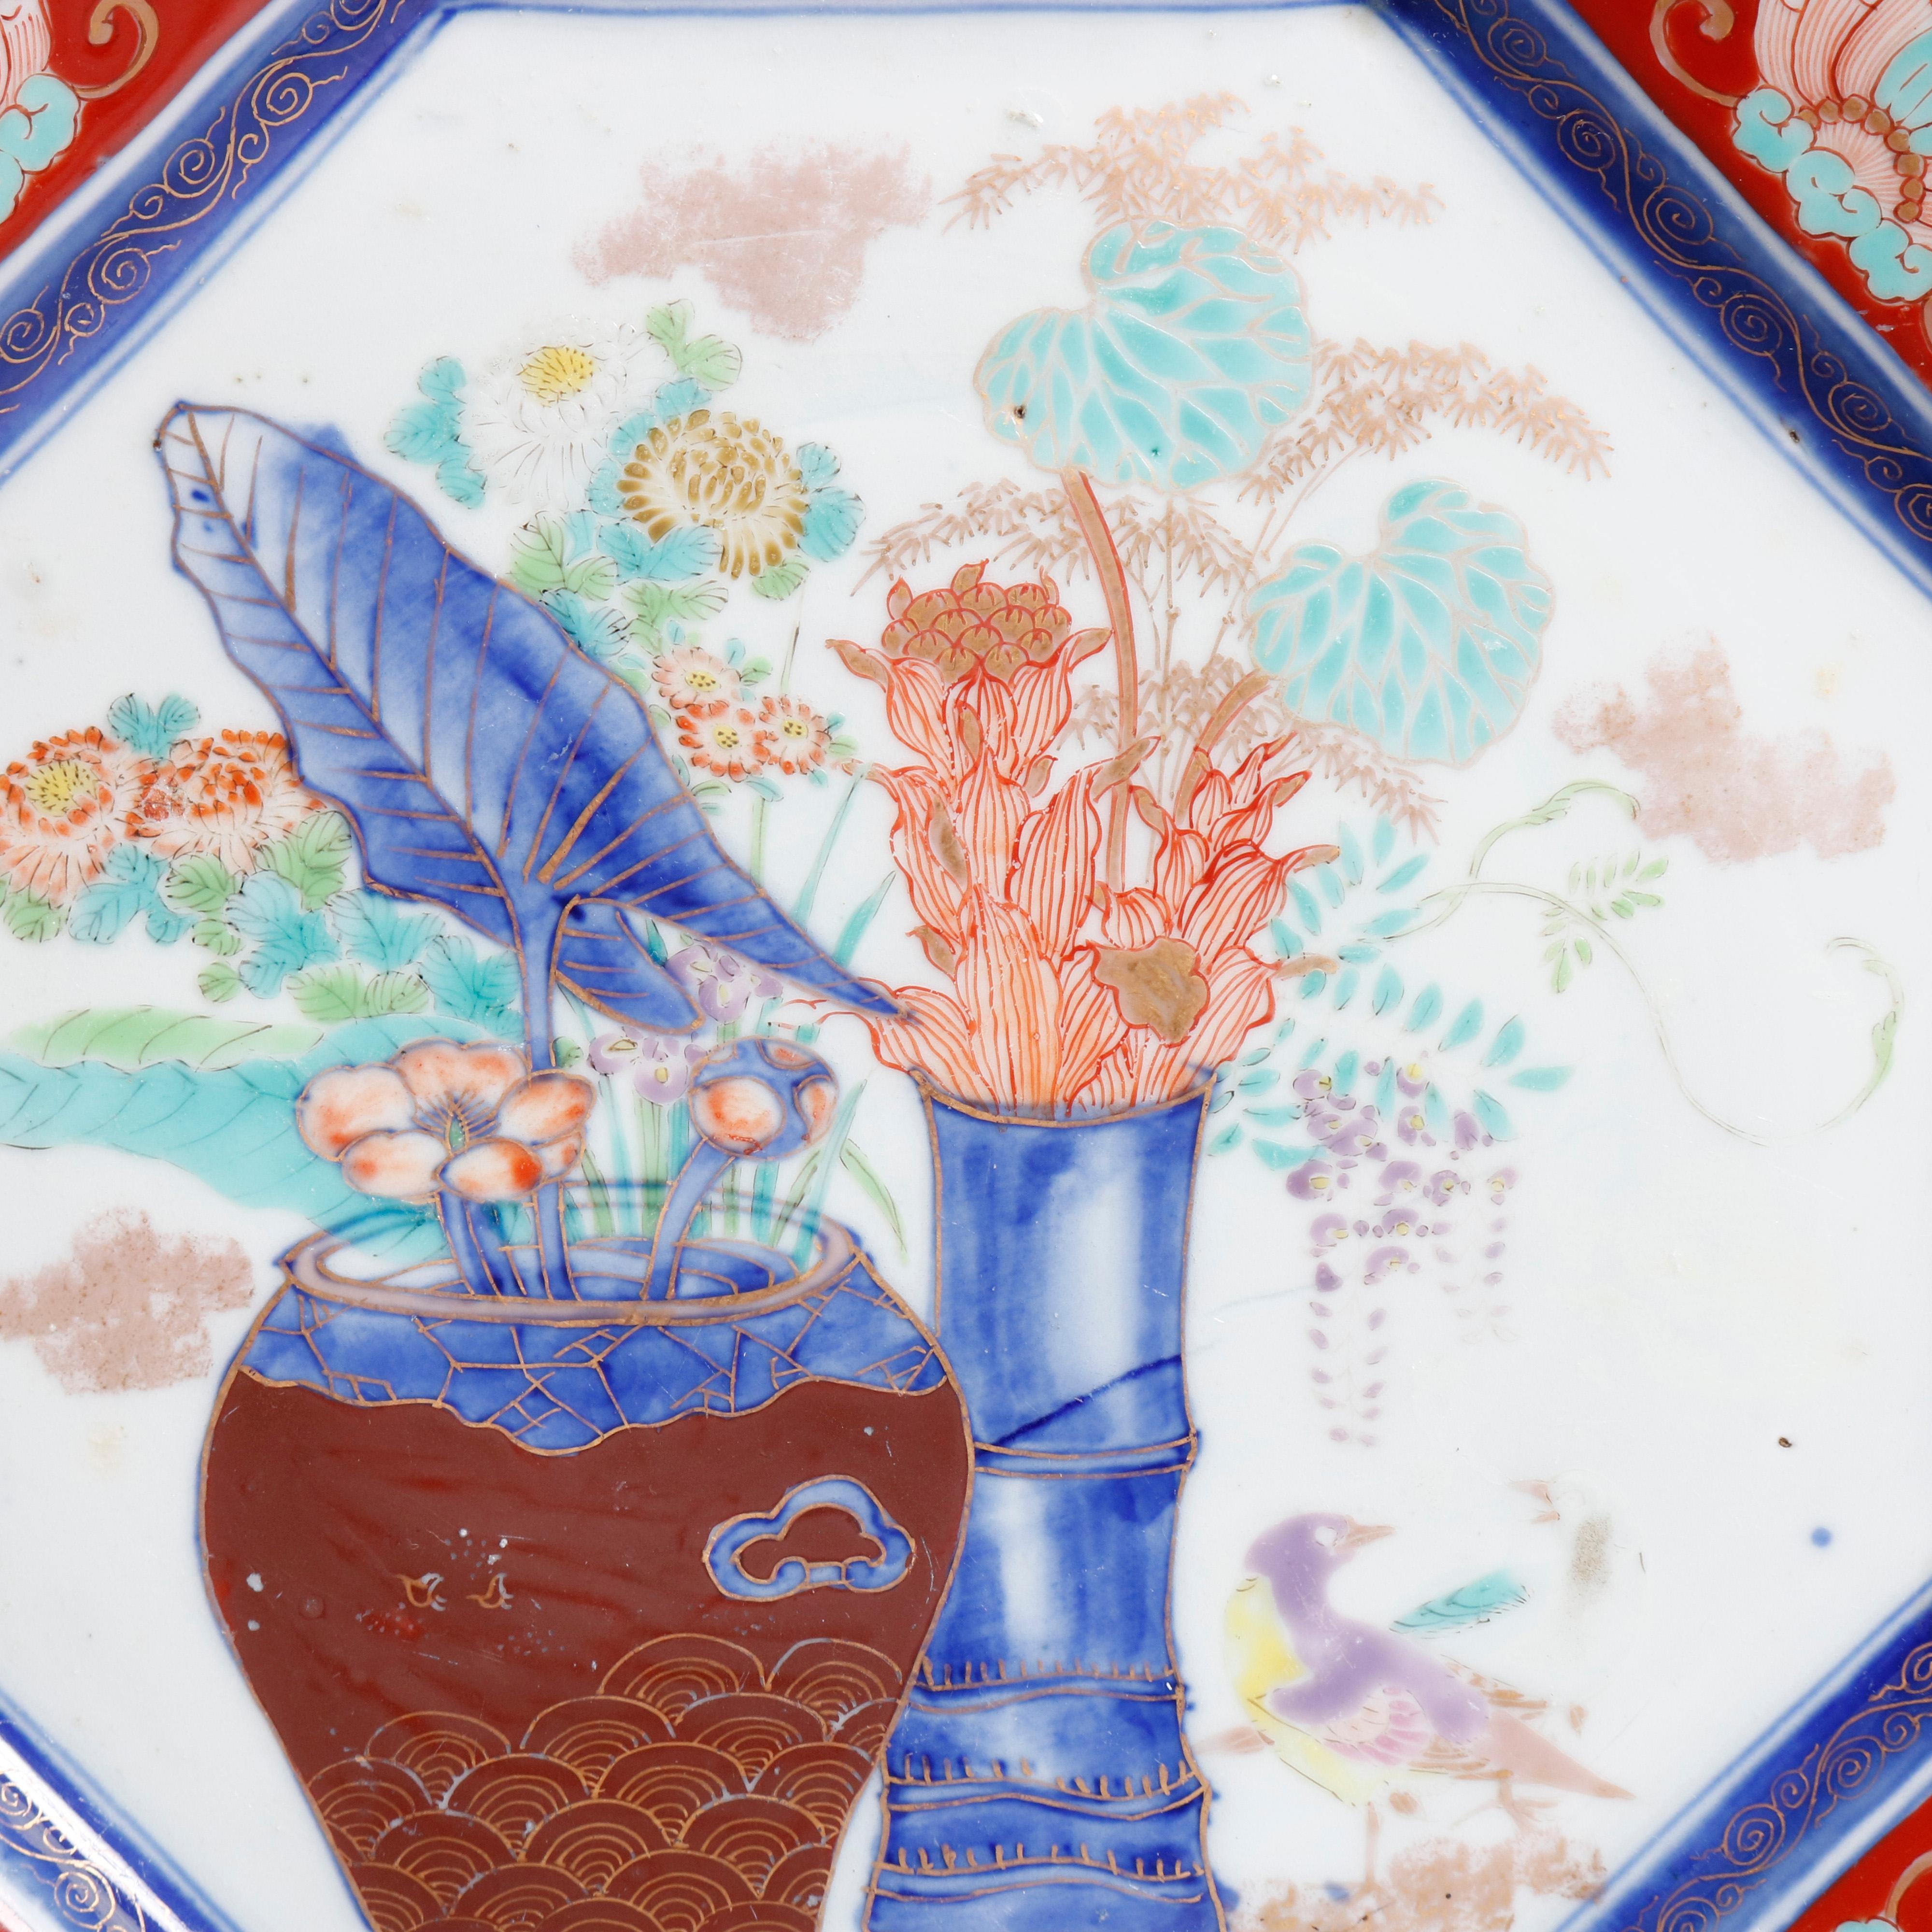 An antique Japanese porcelain charger offers octagonal form with central garden urn scene and faceted border with dragon and foliate reserves, gilt highlights throughout, en verso chop mark signed with blue decoration on rim, circa 1900

***DELIVERY